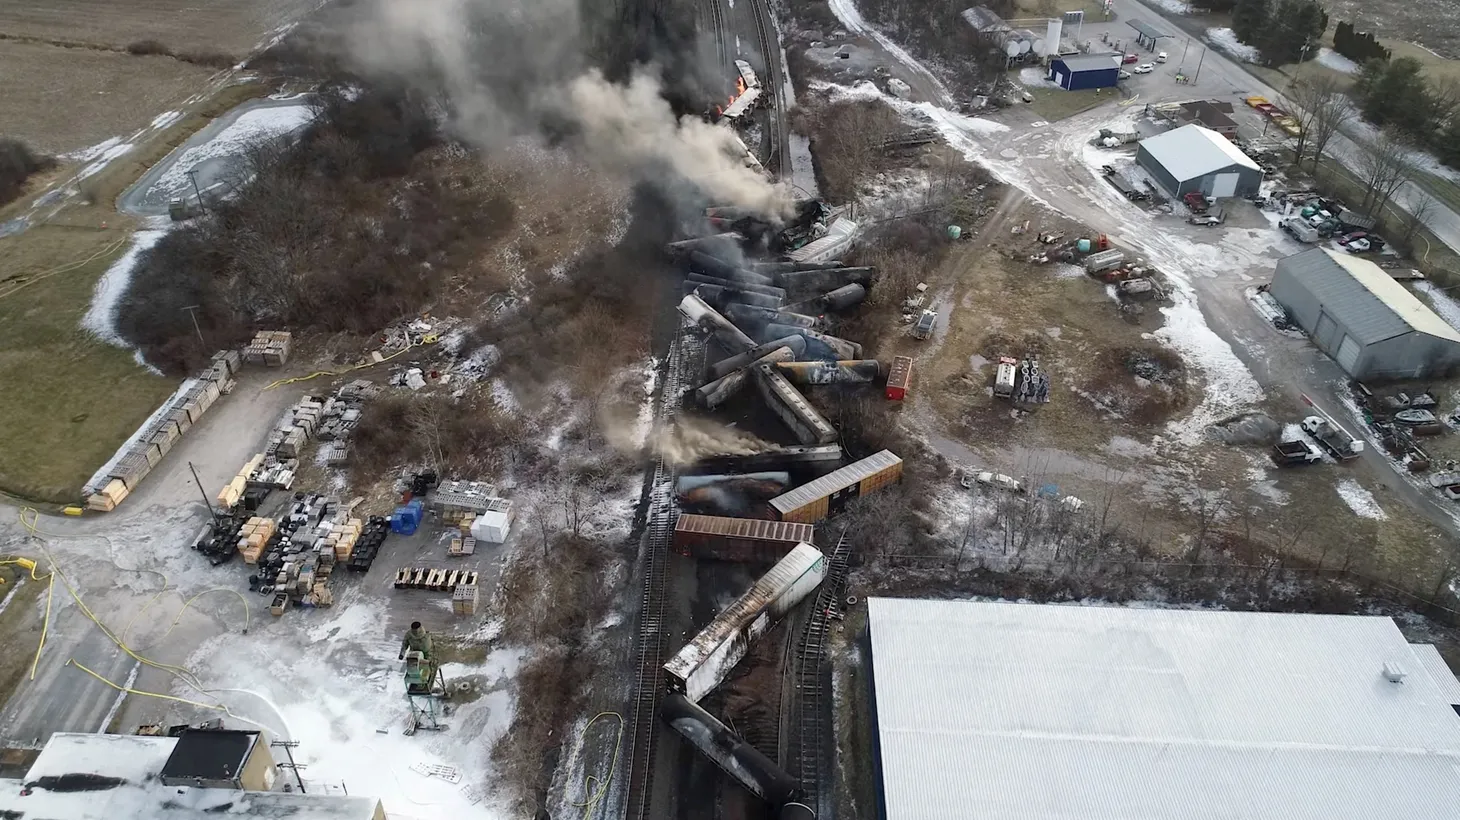 Drone footage shows the freight train derailment in East Palestine, Ohio on February 6, 2023.